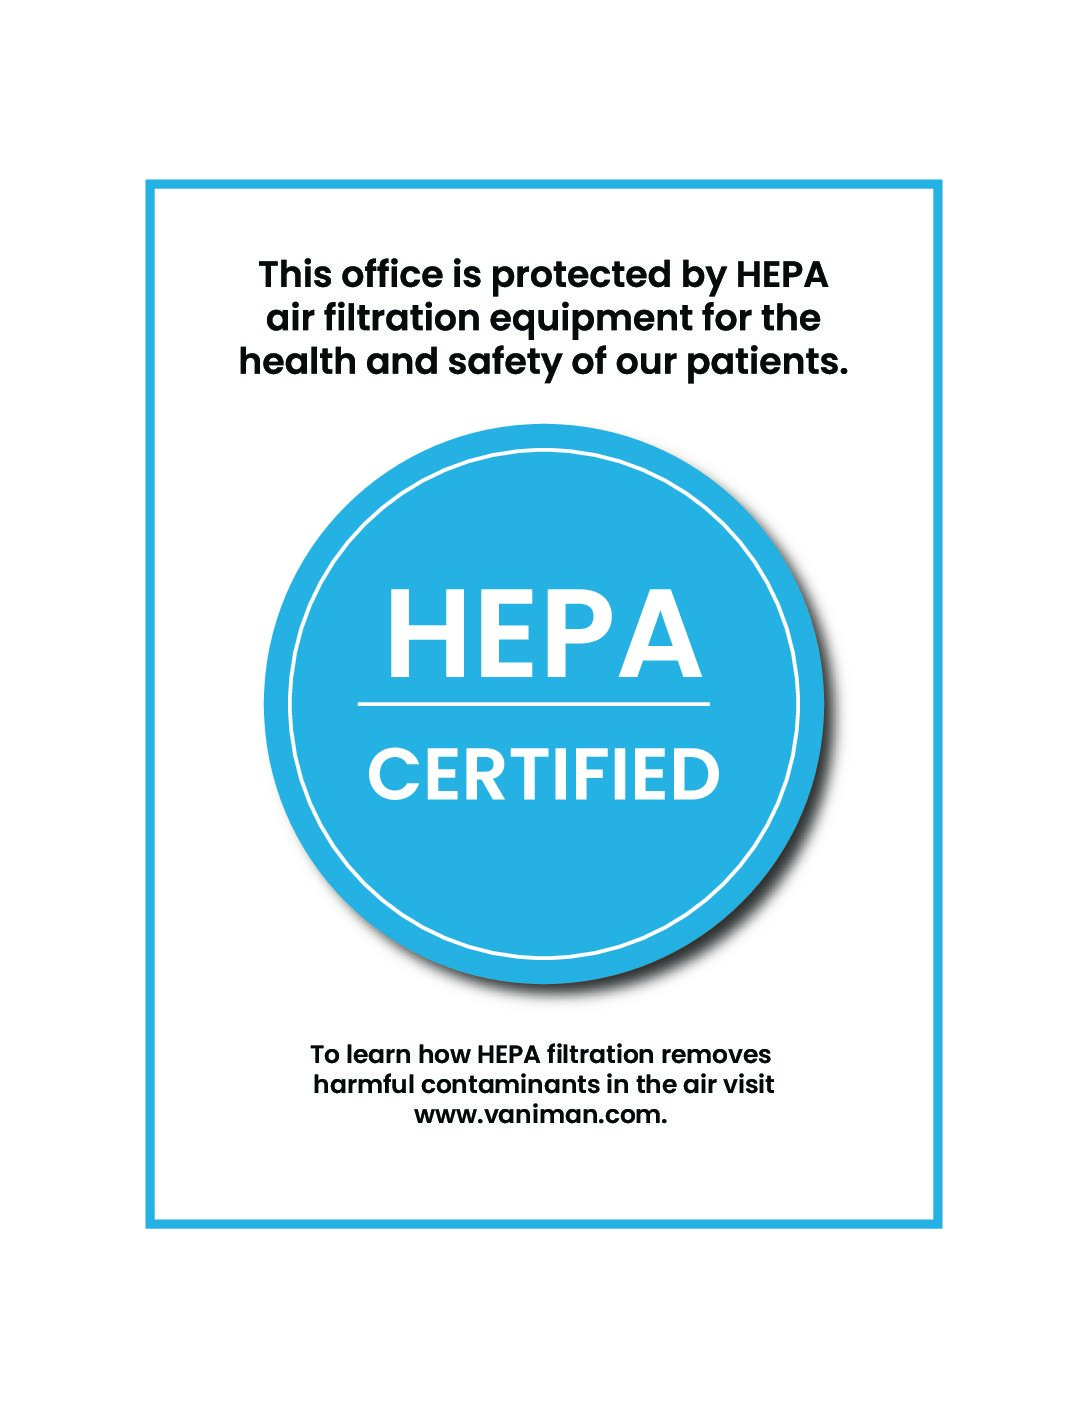 Free Dental Office Signage - HEPA Certified Disclaimer